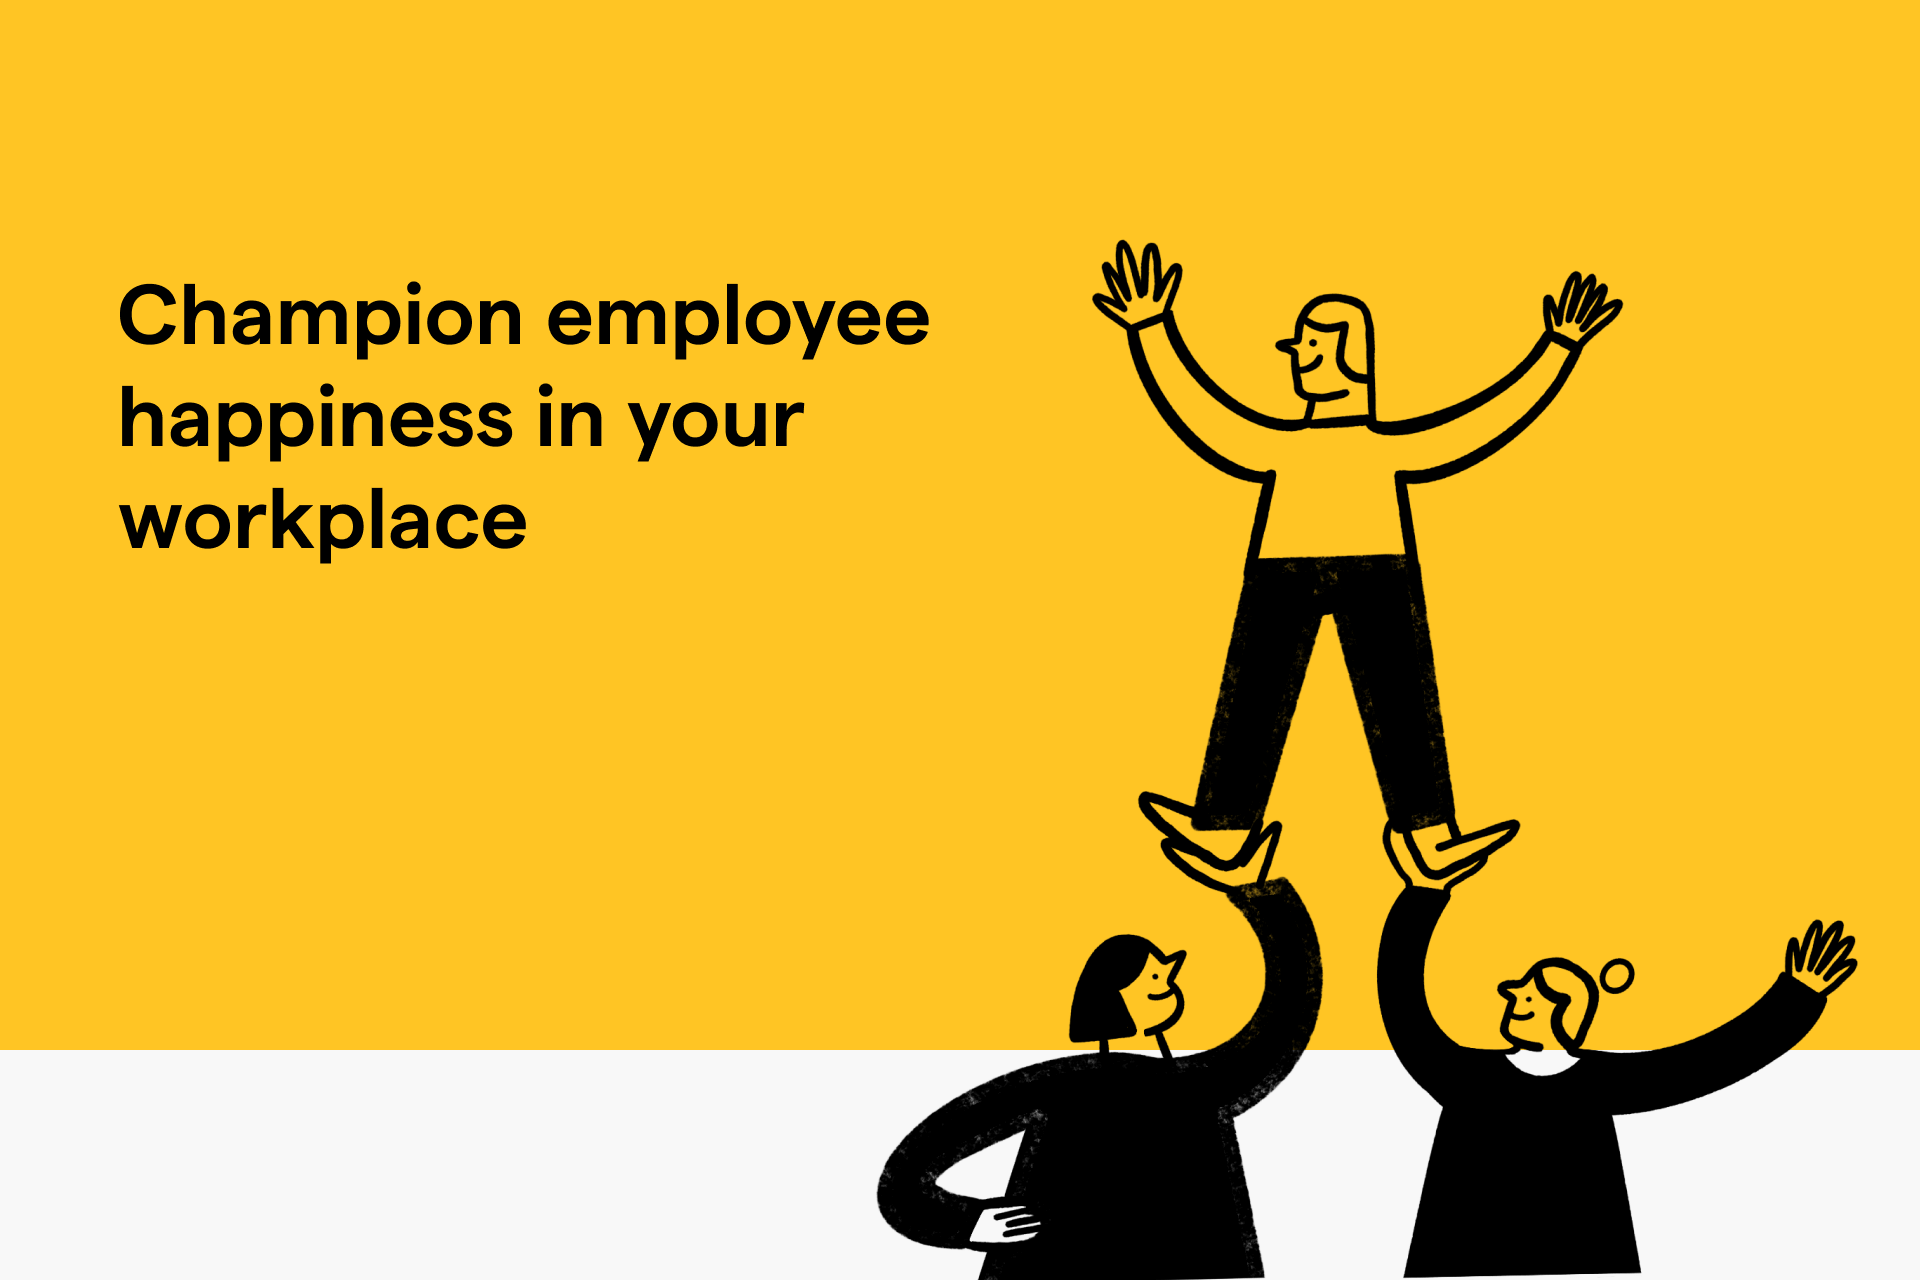 Champion employee happiness in your workplace